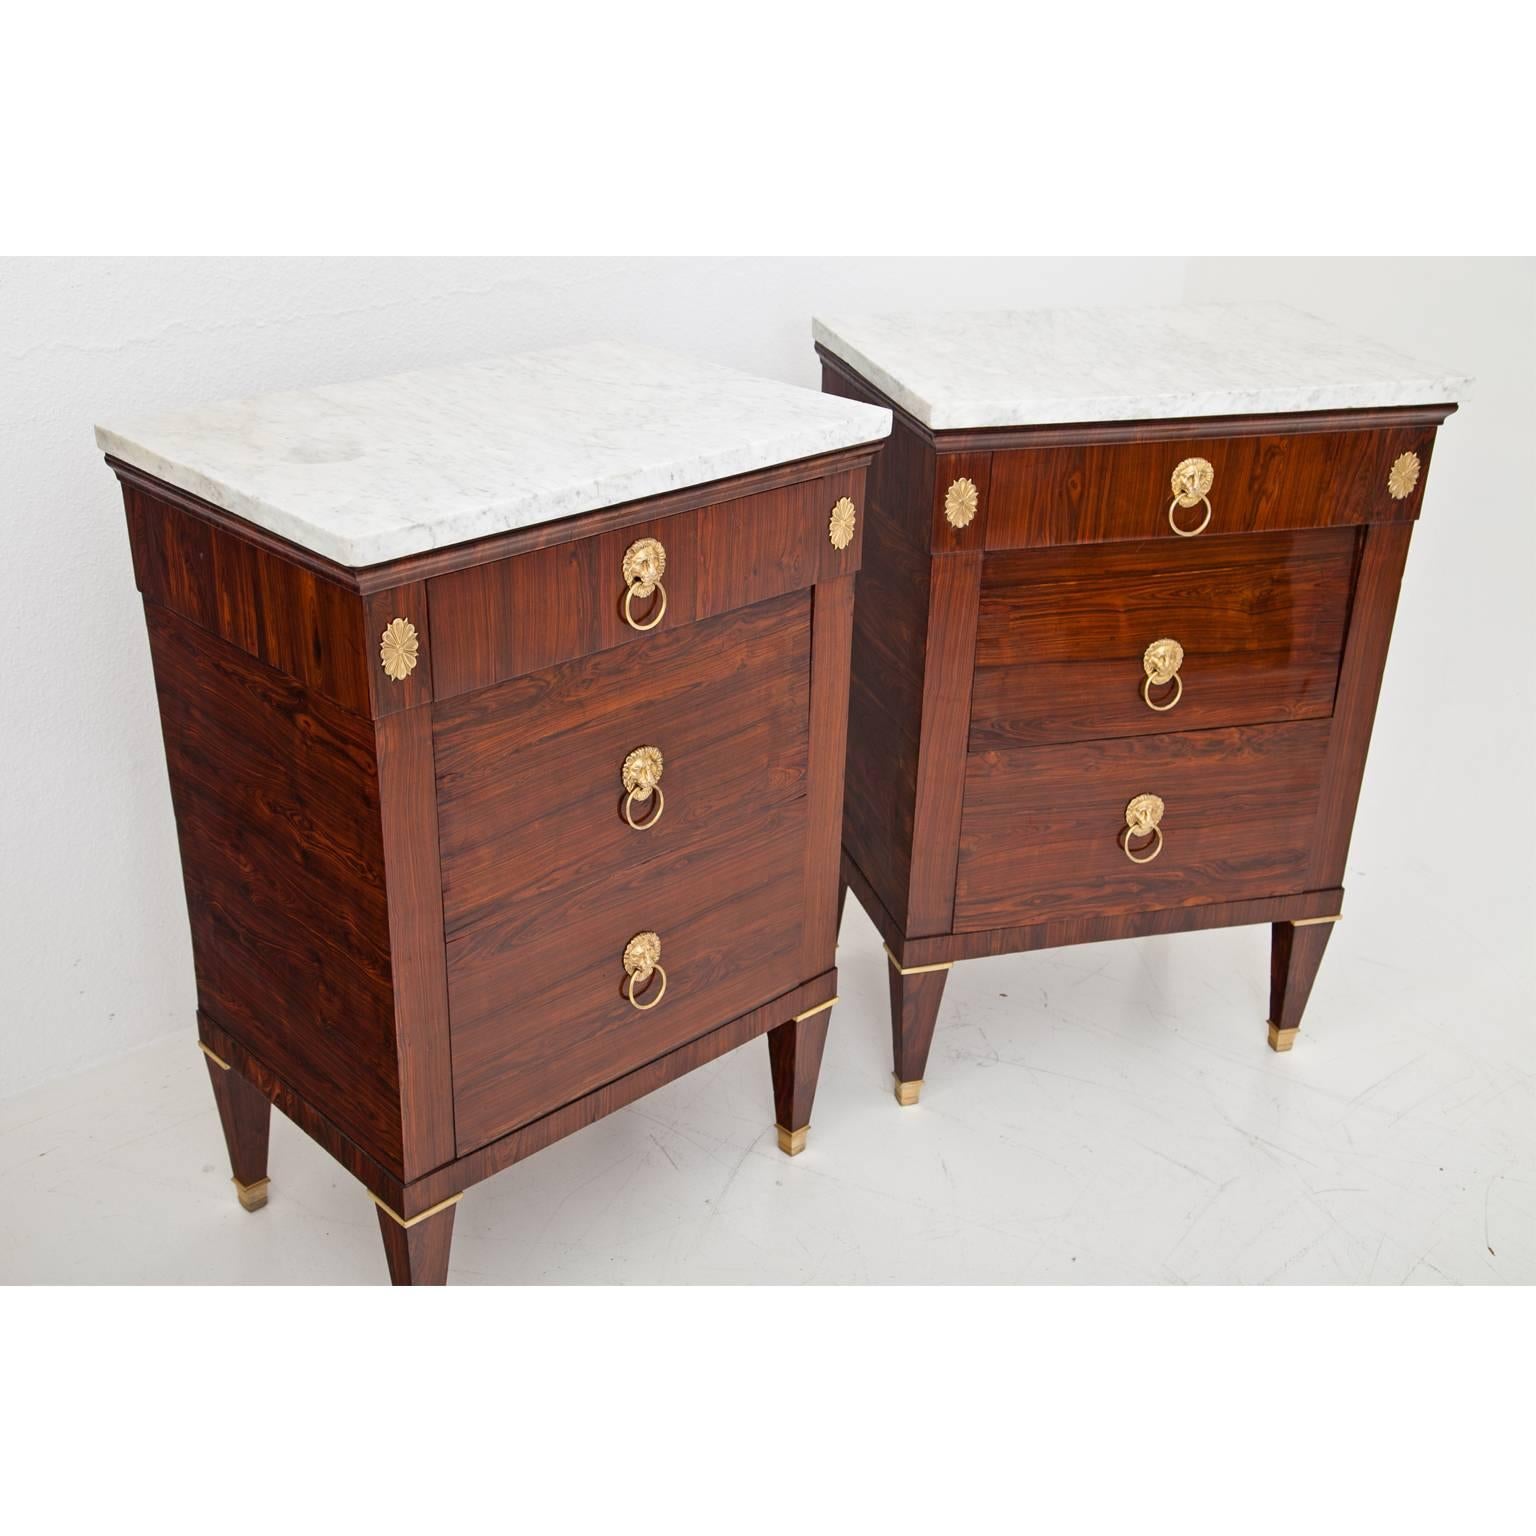 Pair of neoclassical chests of drawers on tapered feet with brass sabots, a white marble top and lionhead fittings. The chests each have a top drawer and a middle compartment with a folding door. The lowest drawer is designed as a pull-out trunk